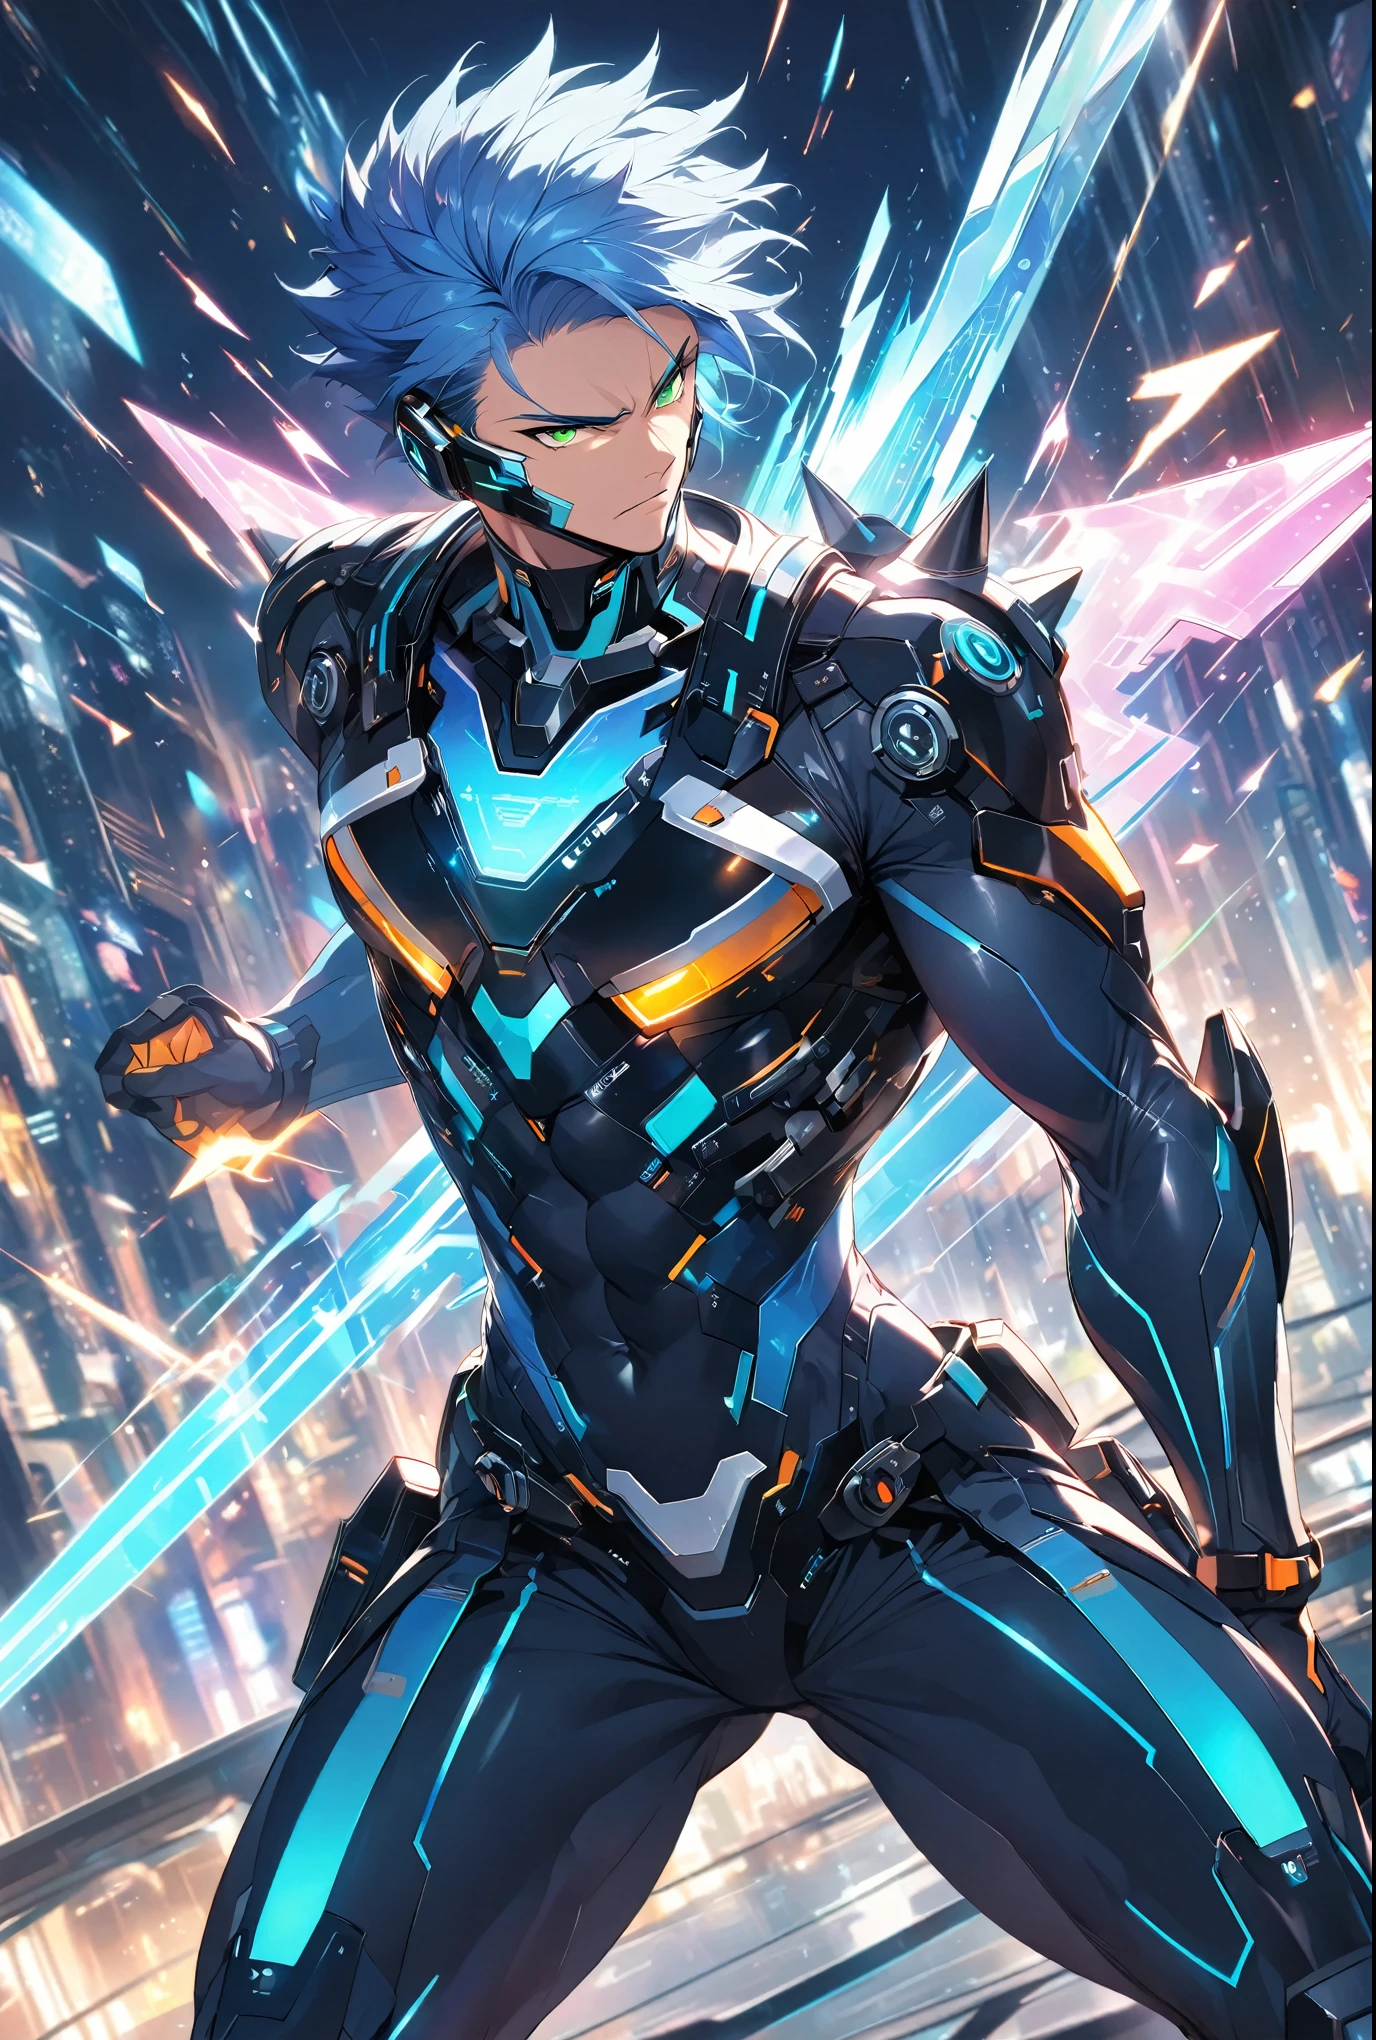 A dynamic male character in a futuristic black and blue cyber suit with glowing LED lines, short spiky blue hair, and sharp green eyes. He is tall, muscular, and has an energy backpack on his back. The character is in a combat pose, wielding energy blades, with a serious and focused expression. The background is a digital cityscape with floating holographic elements and light effects, representing a cybernetic world.